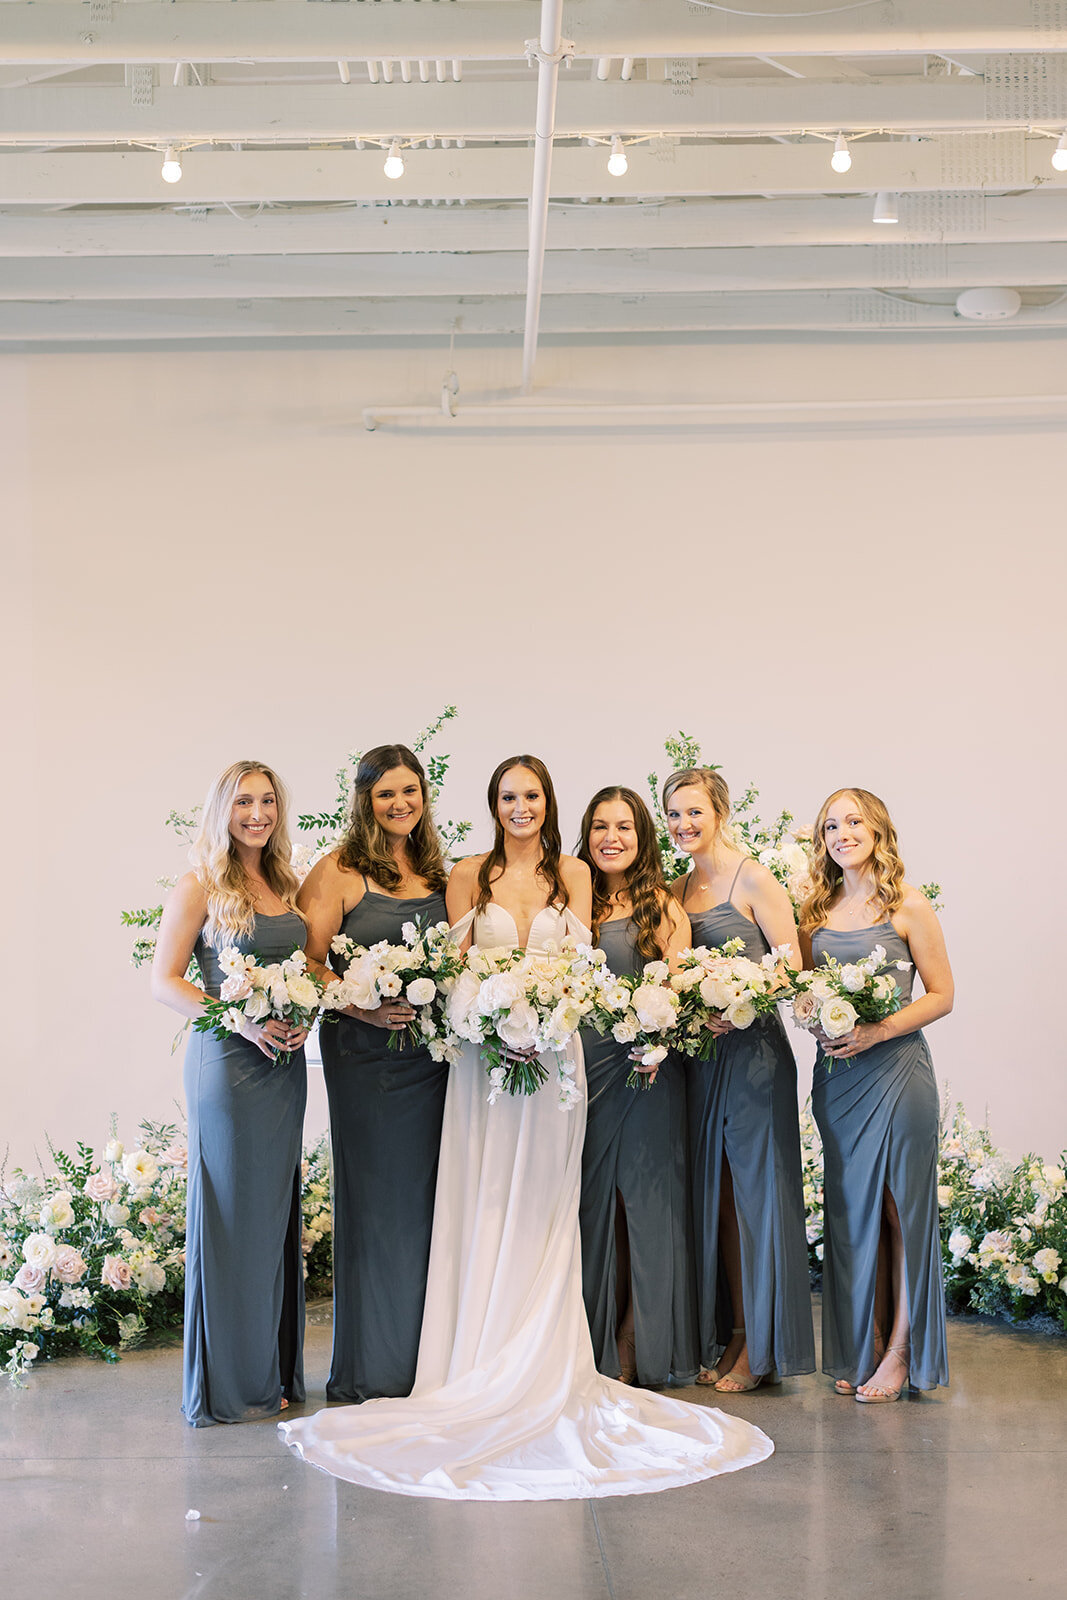 Bridal party florals of white garden roses, peonies, ranunculus, sweet peas, scabiosa, butterfly ranunculus and dark greenery in floral hues of white, cream, and blush. Designed by Rosemary and Finch in Nashville, TN.